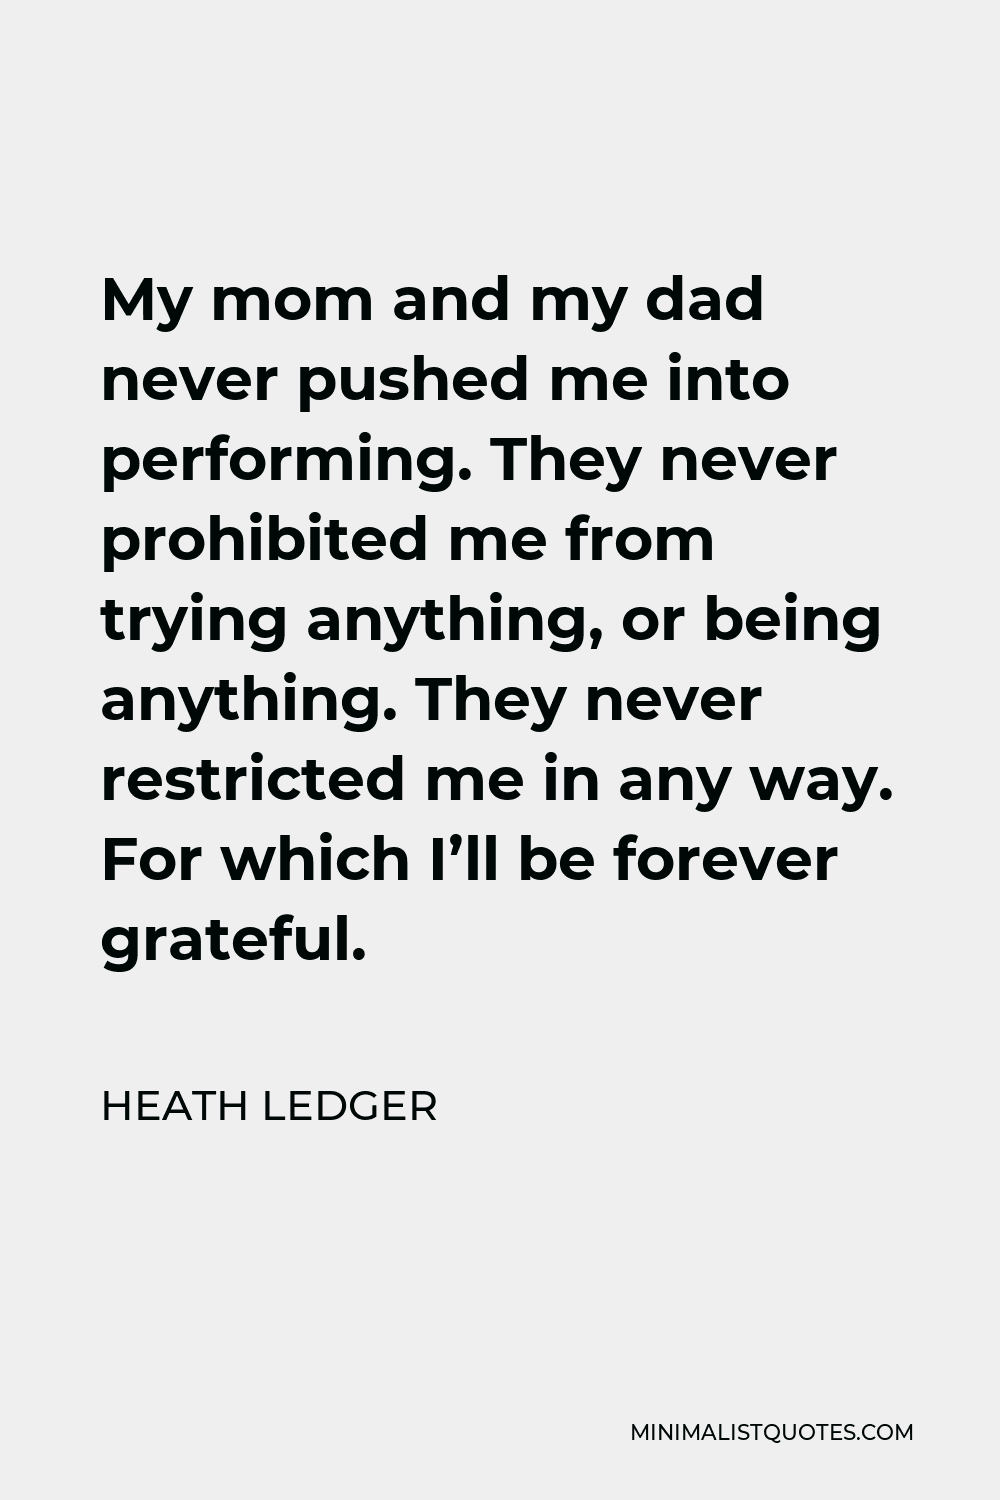 Heath Ledger Quote - My mom and my dad never pushed me into performing. They never prohibited me from trying anything, or being anything. They never restricted me in any way. For which I’ll be forever grateful.